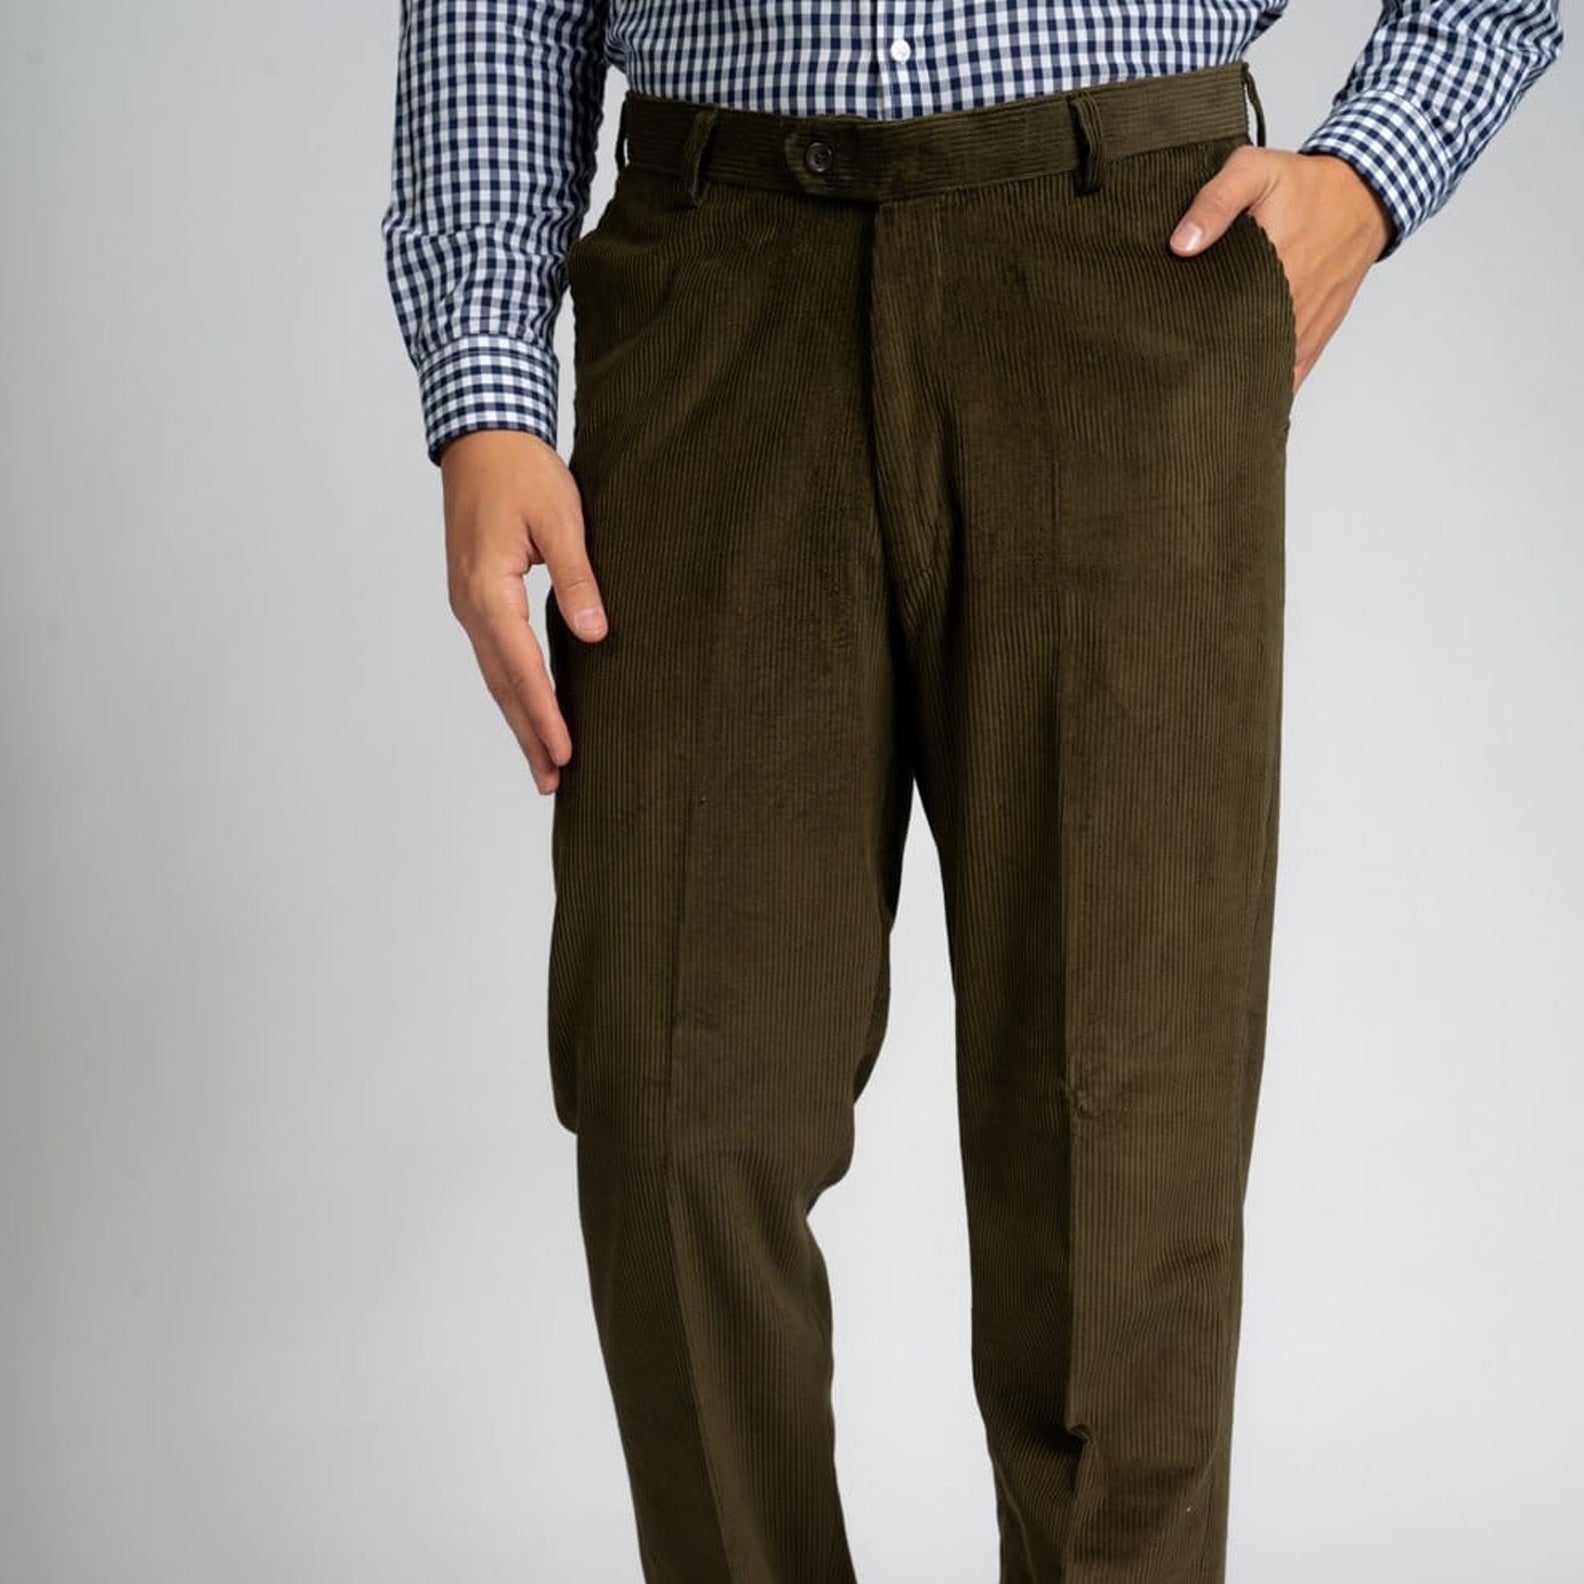 Corduroy Trousers  Soft Red